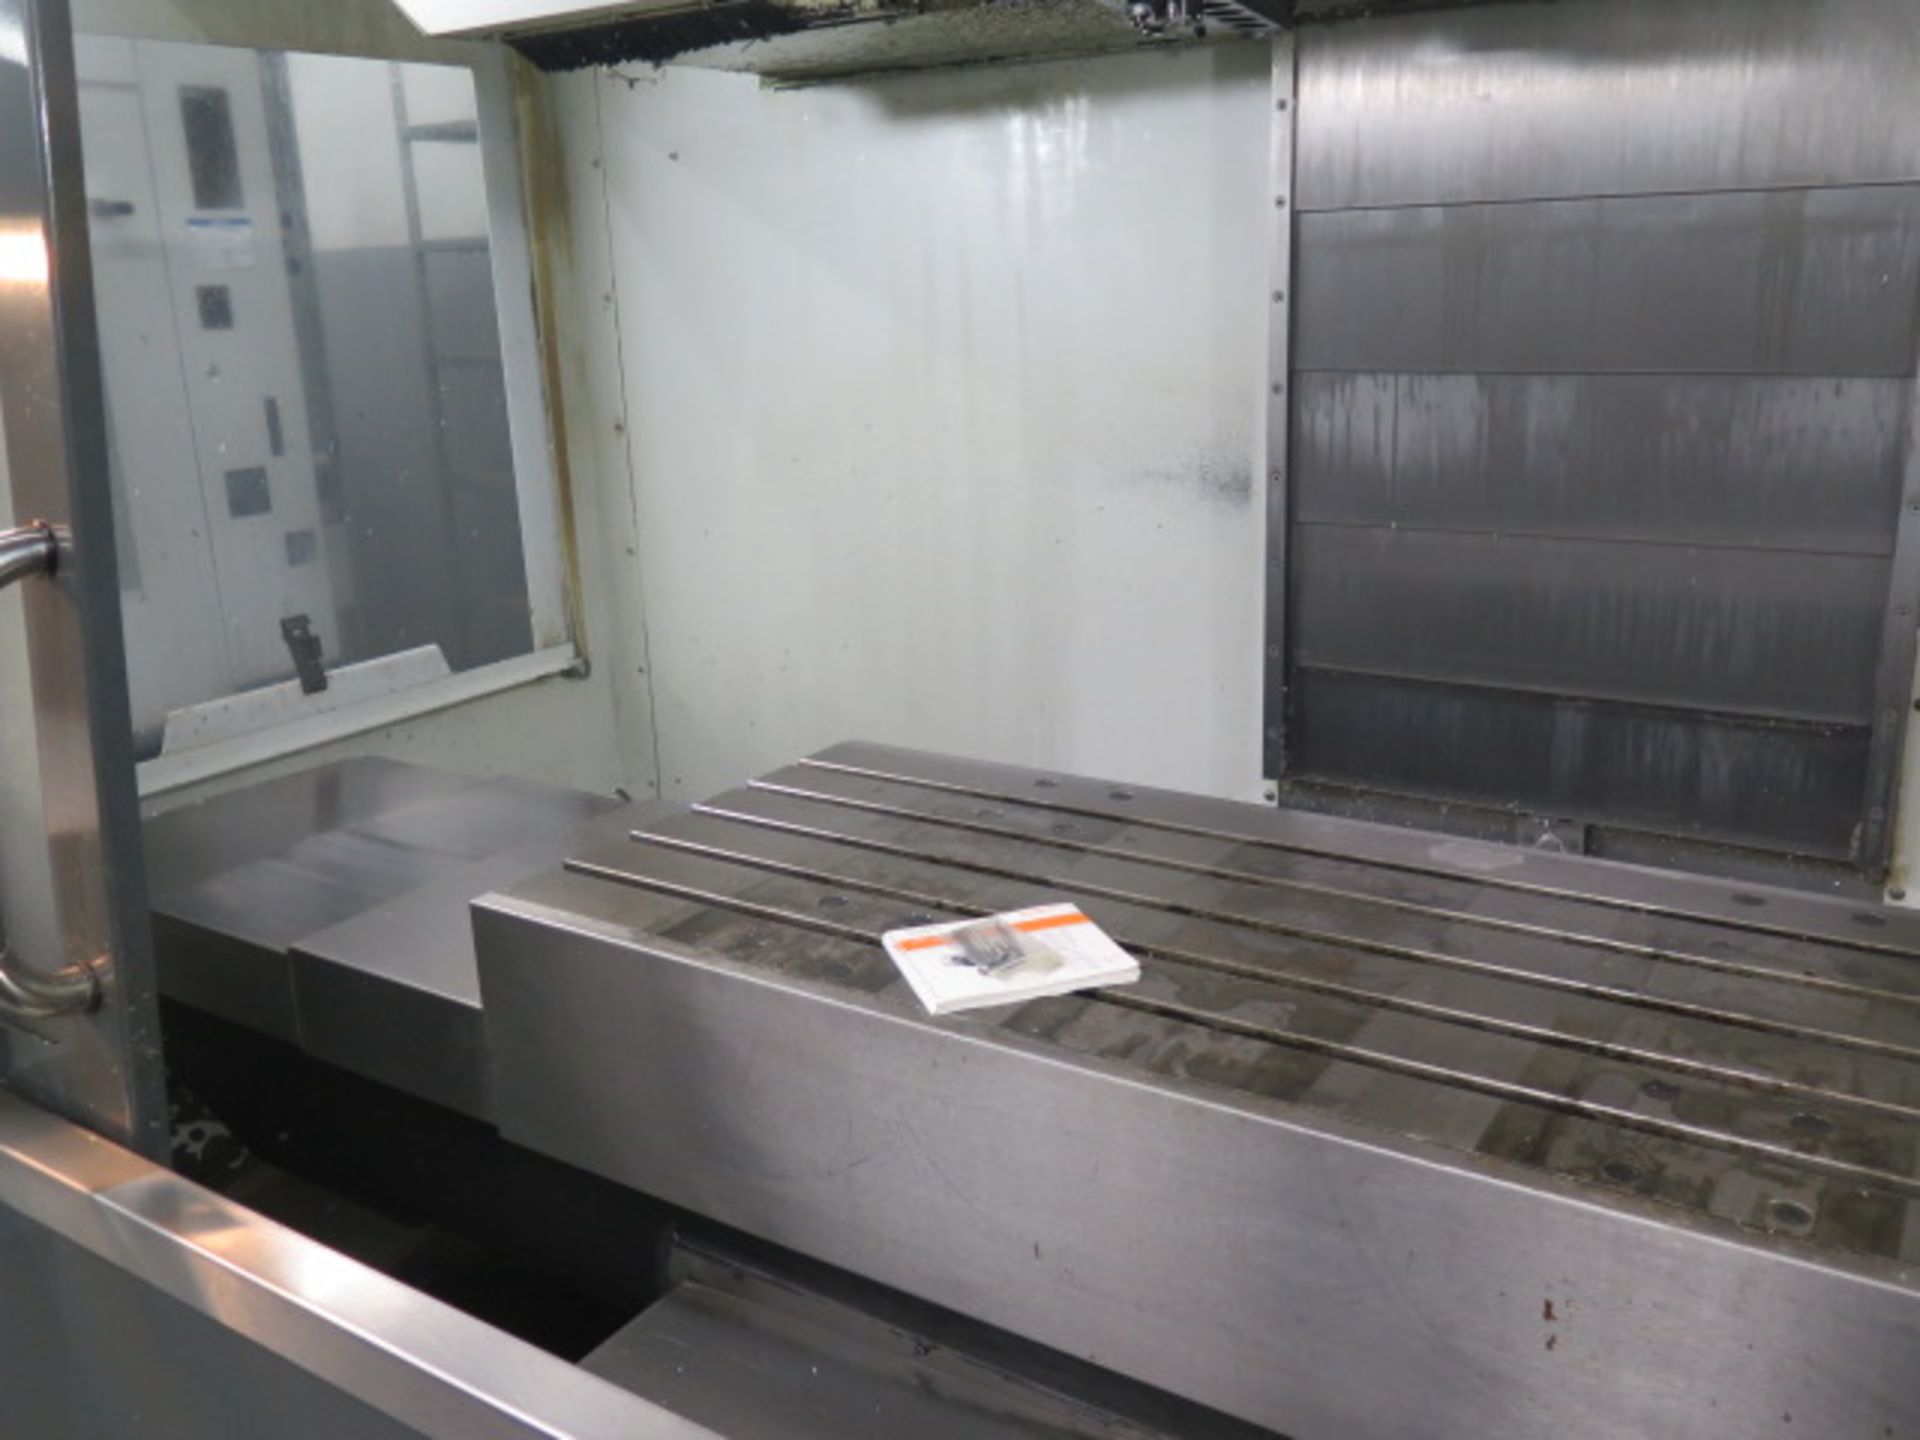 2011 Haas VF-3SS 4-Axis CNC Vertical Machining Center s/n 1087709 w/ Haas Controls, Hand Wheel, 24-S - Image 13 of 17